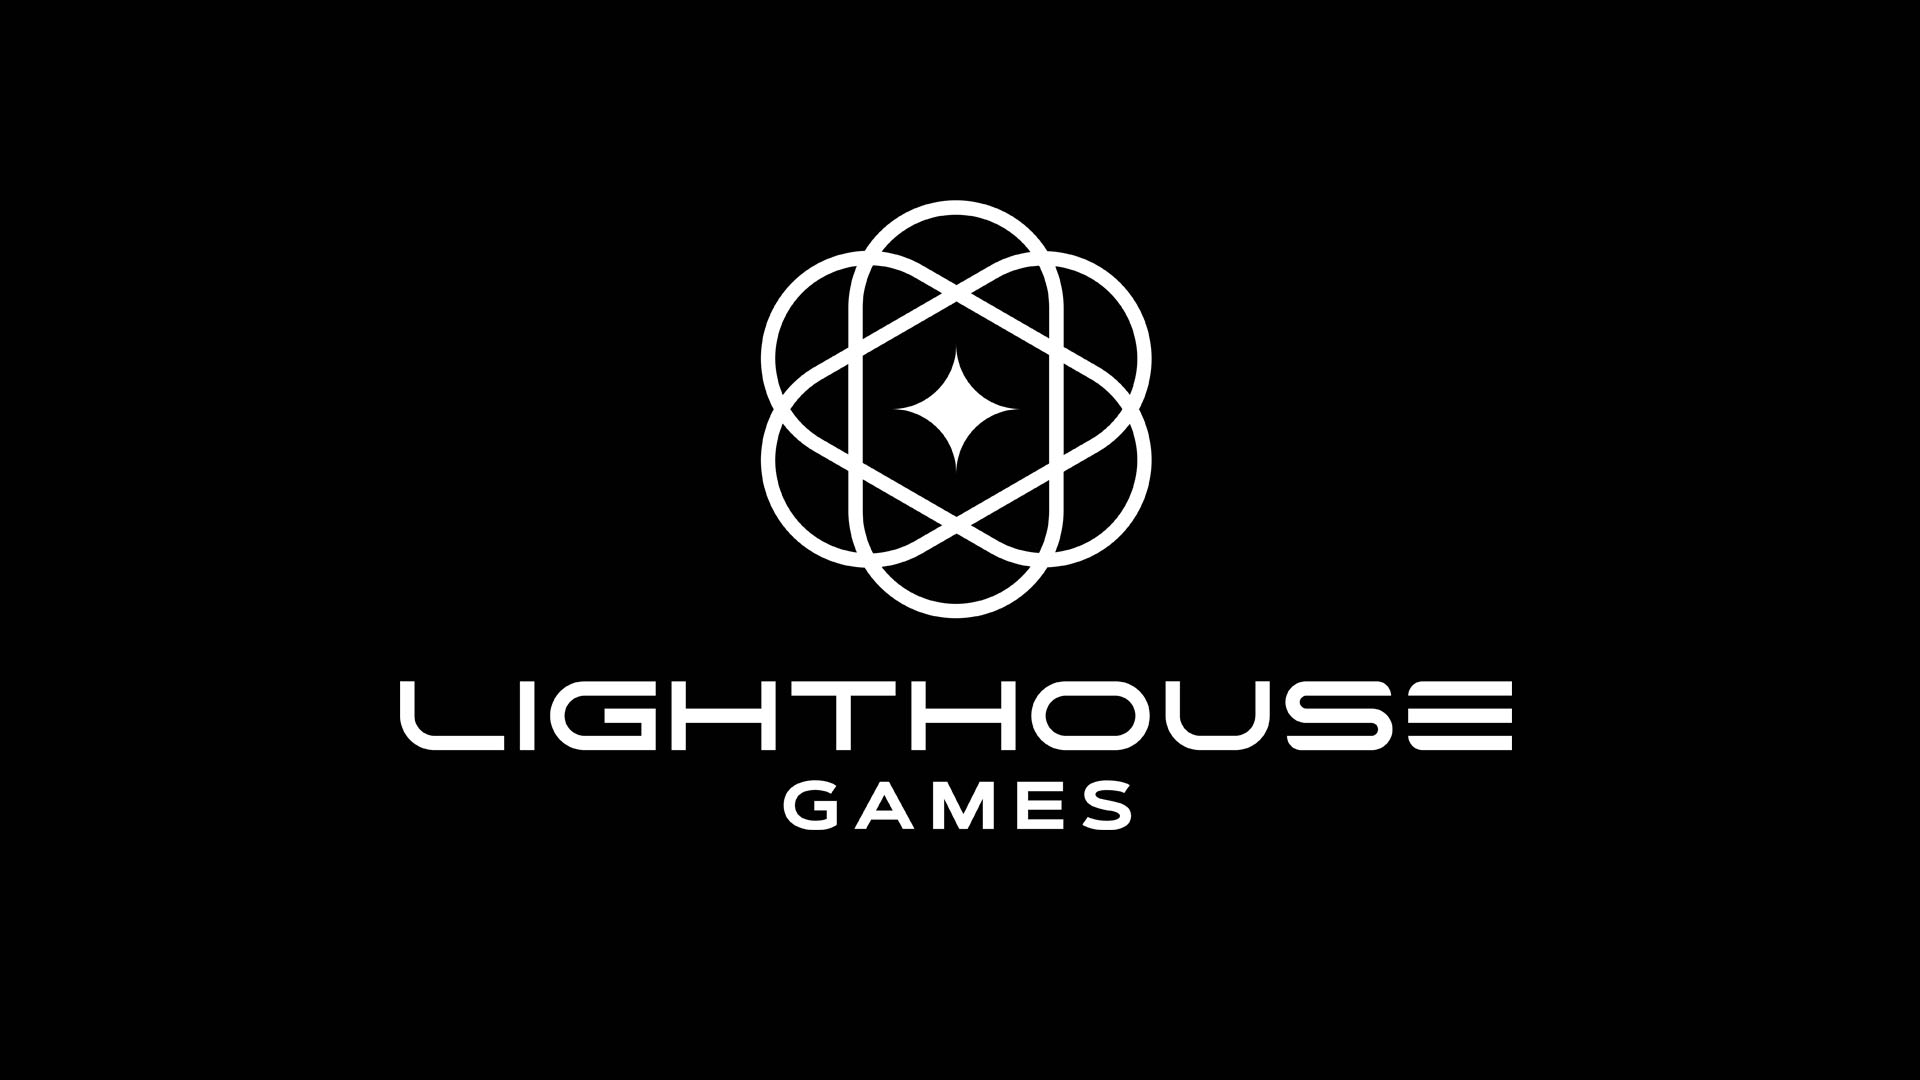 Ex-Playground Games boss launches new studio Lighthouse Games